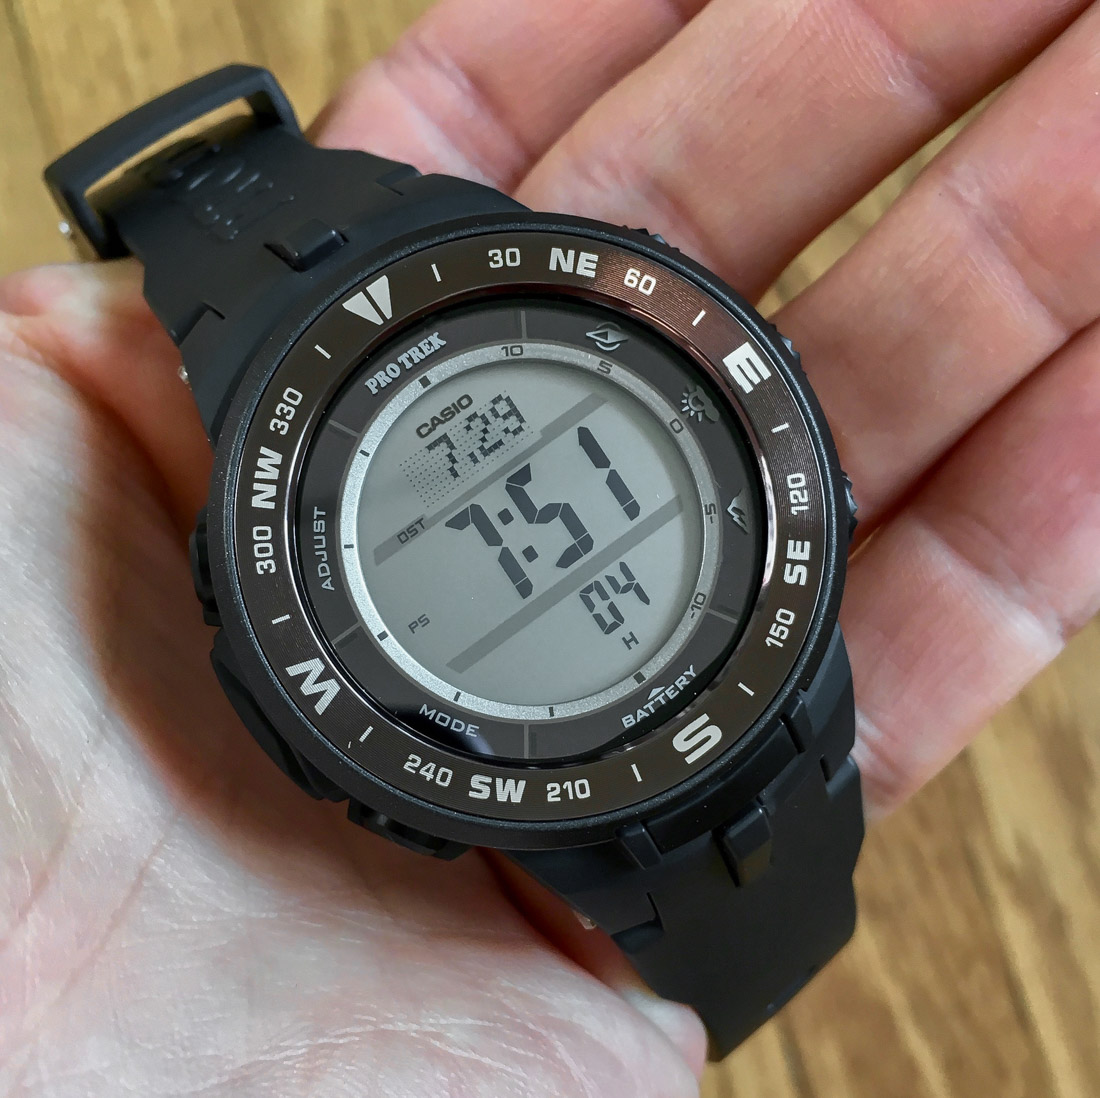 Casio PRG330 Outdoor Smartwatch Review | aBlogtoWatch